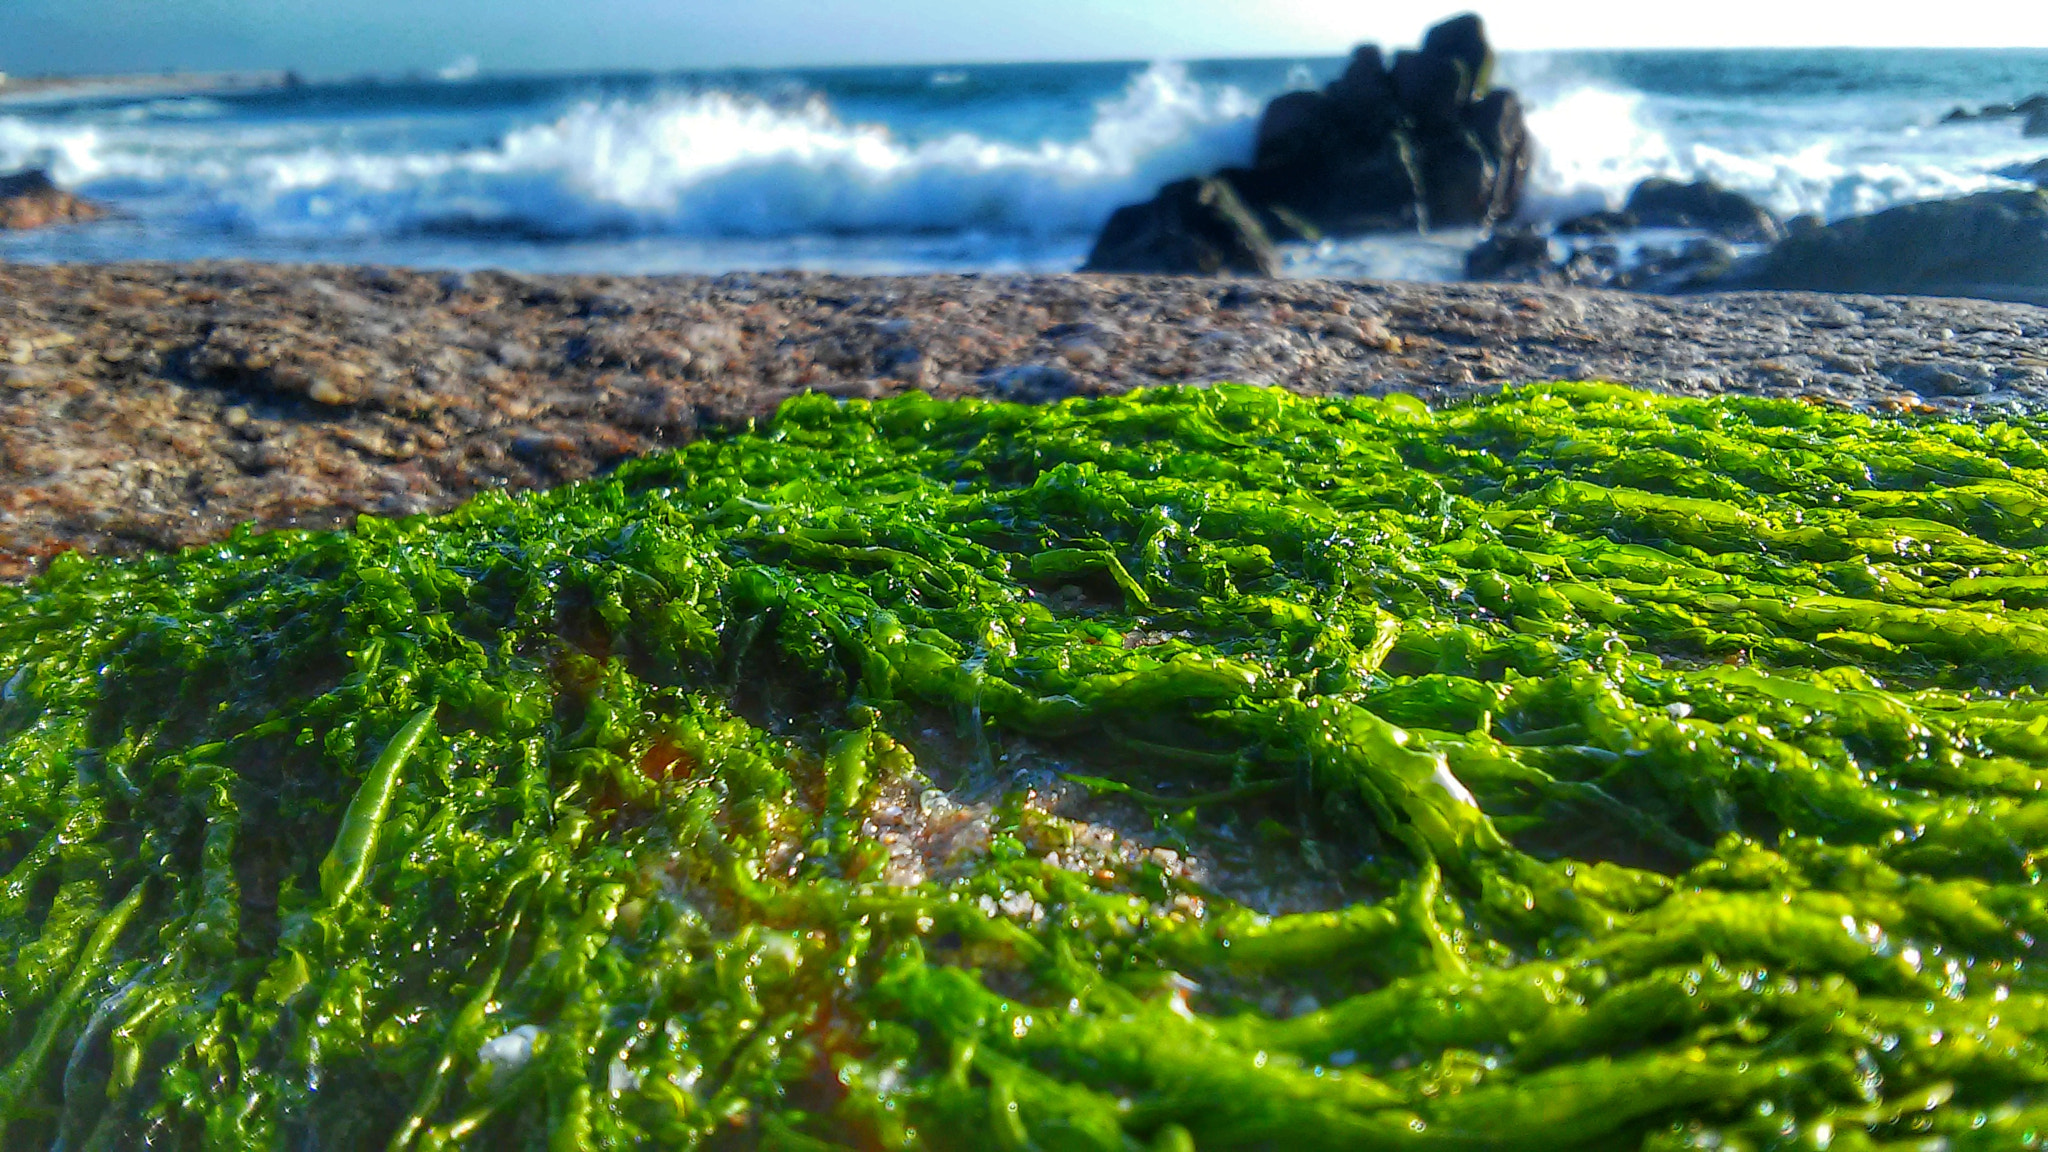 LG D405N sample photo. Waves of green photography